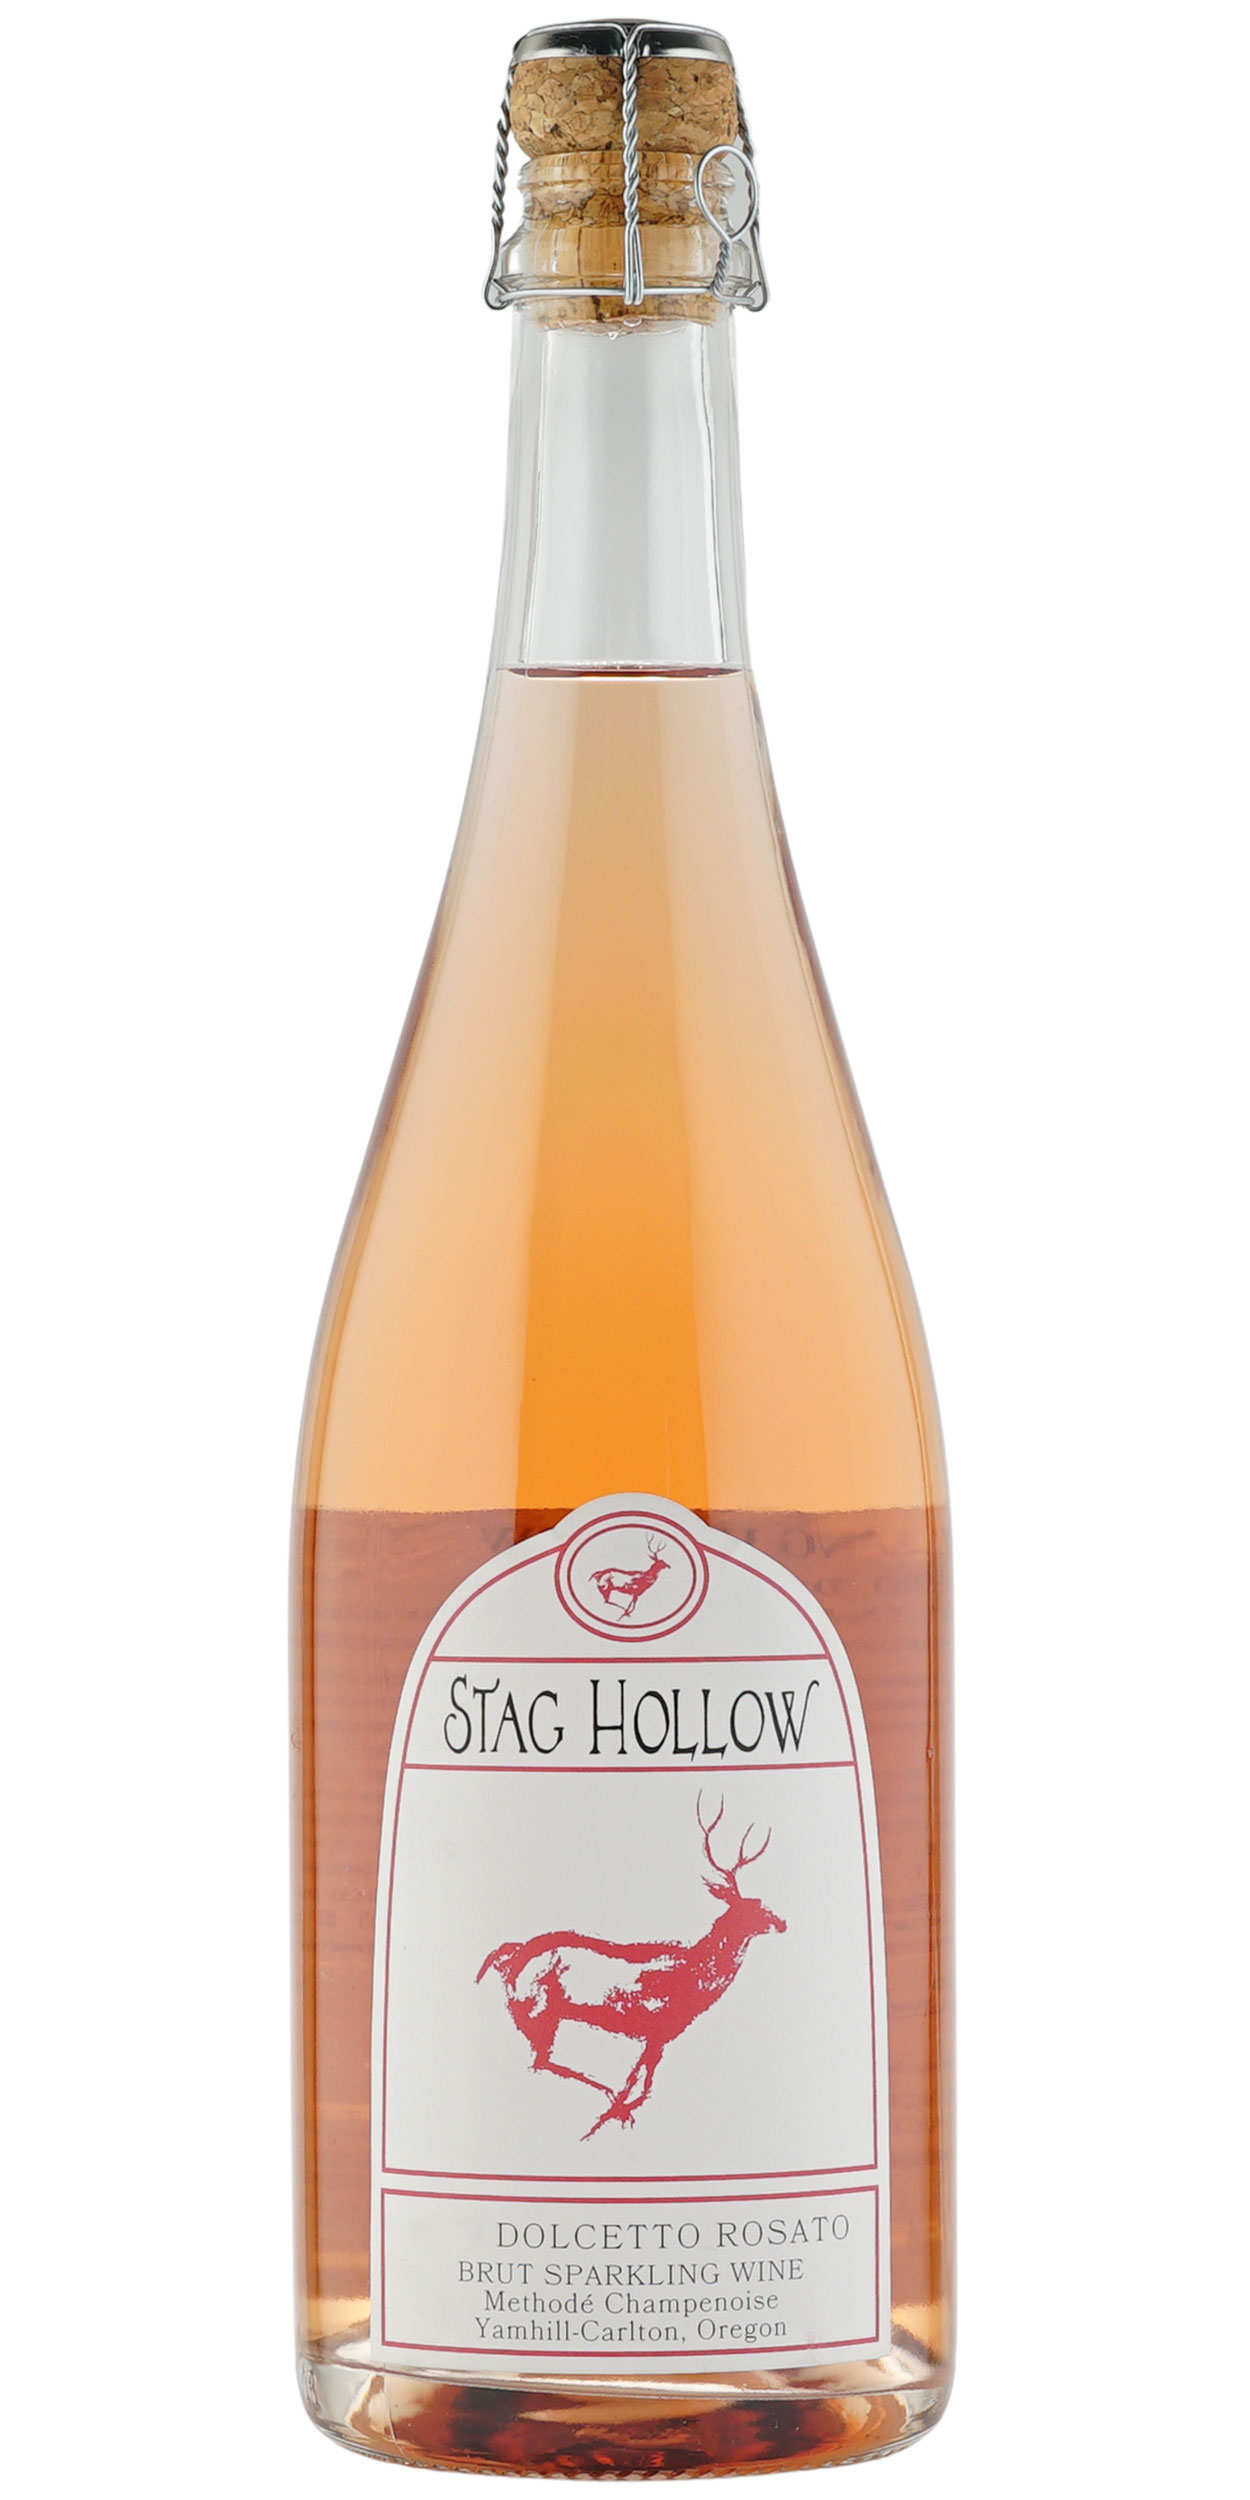 Bottle of Stag Hollow Dolcetto Rosato